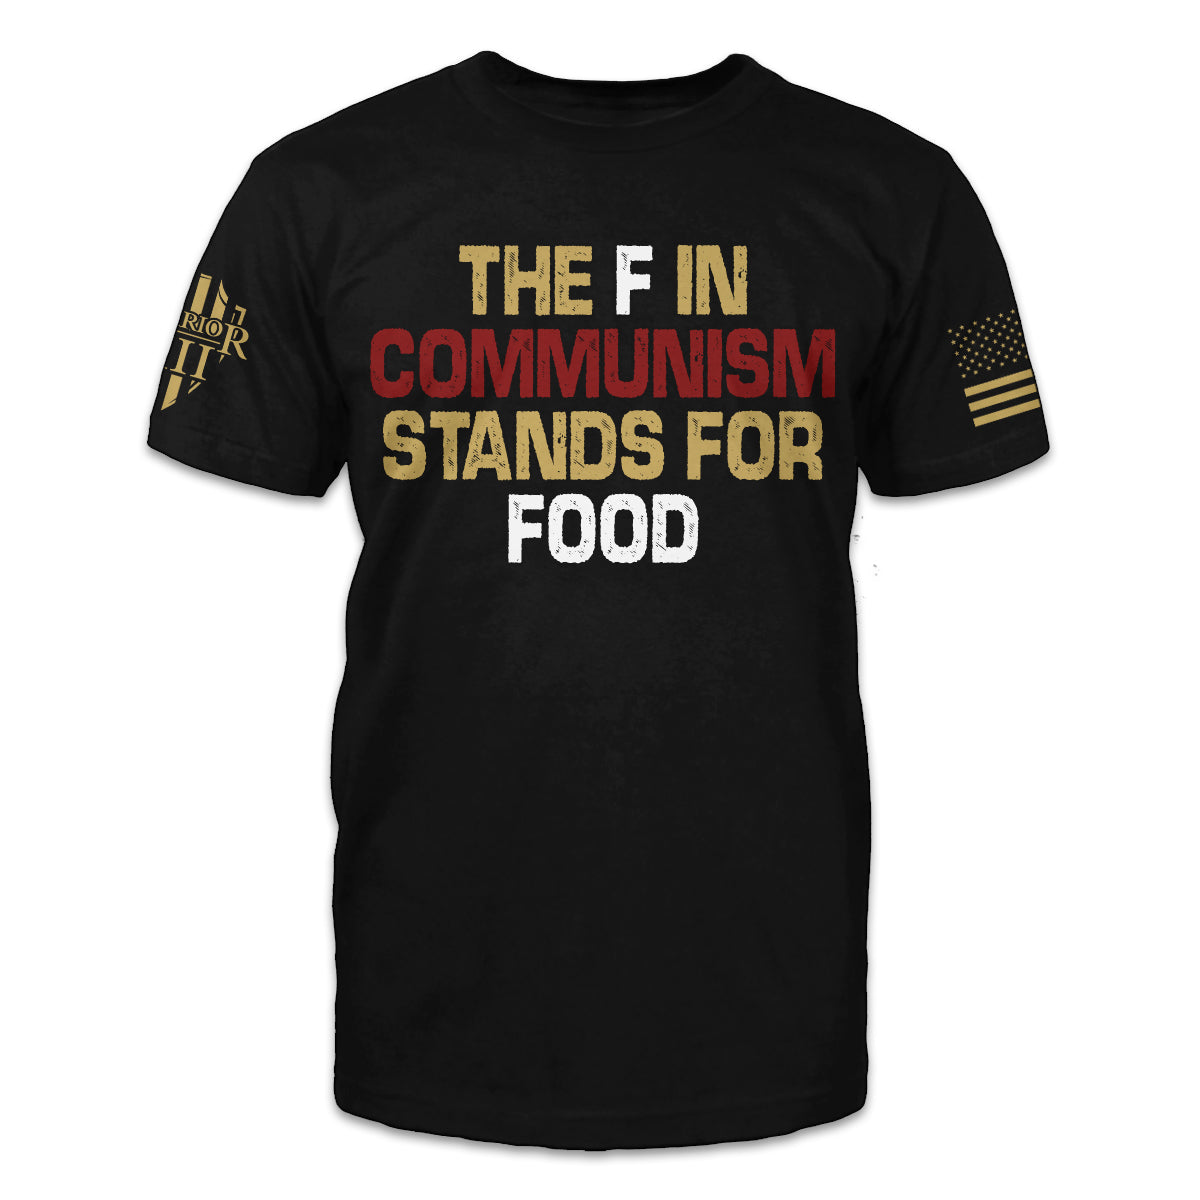 A black t-shirt with the words "The F in communism stands for food" printed on the front.